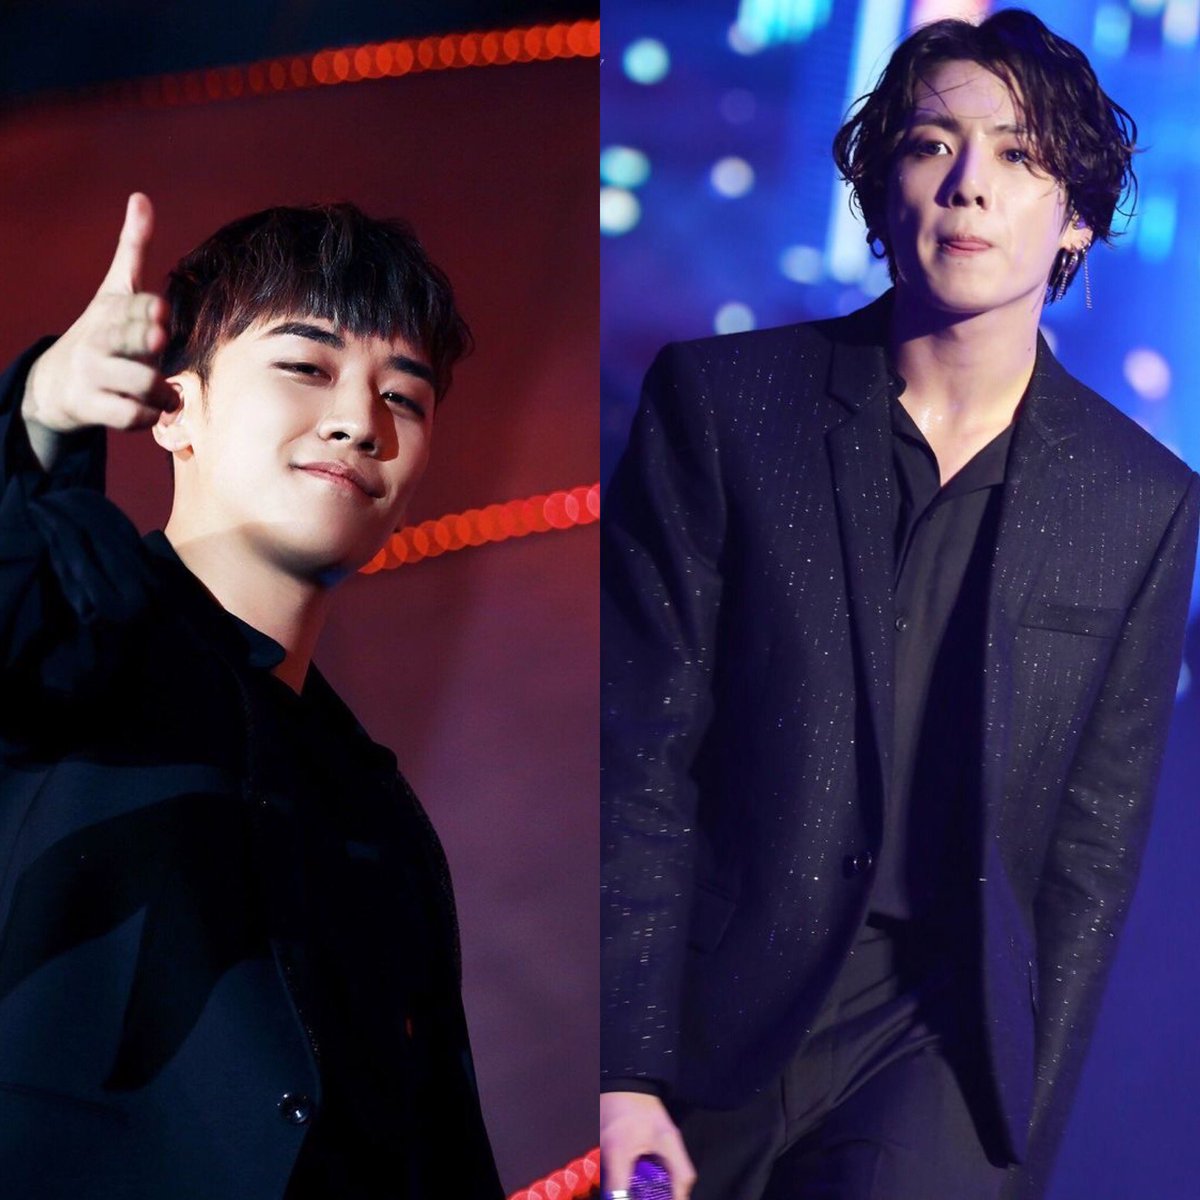 Both Seungri and Jungkook take the “hyung role” whenever the hyungs need maknae